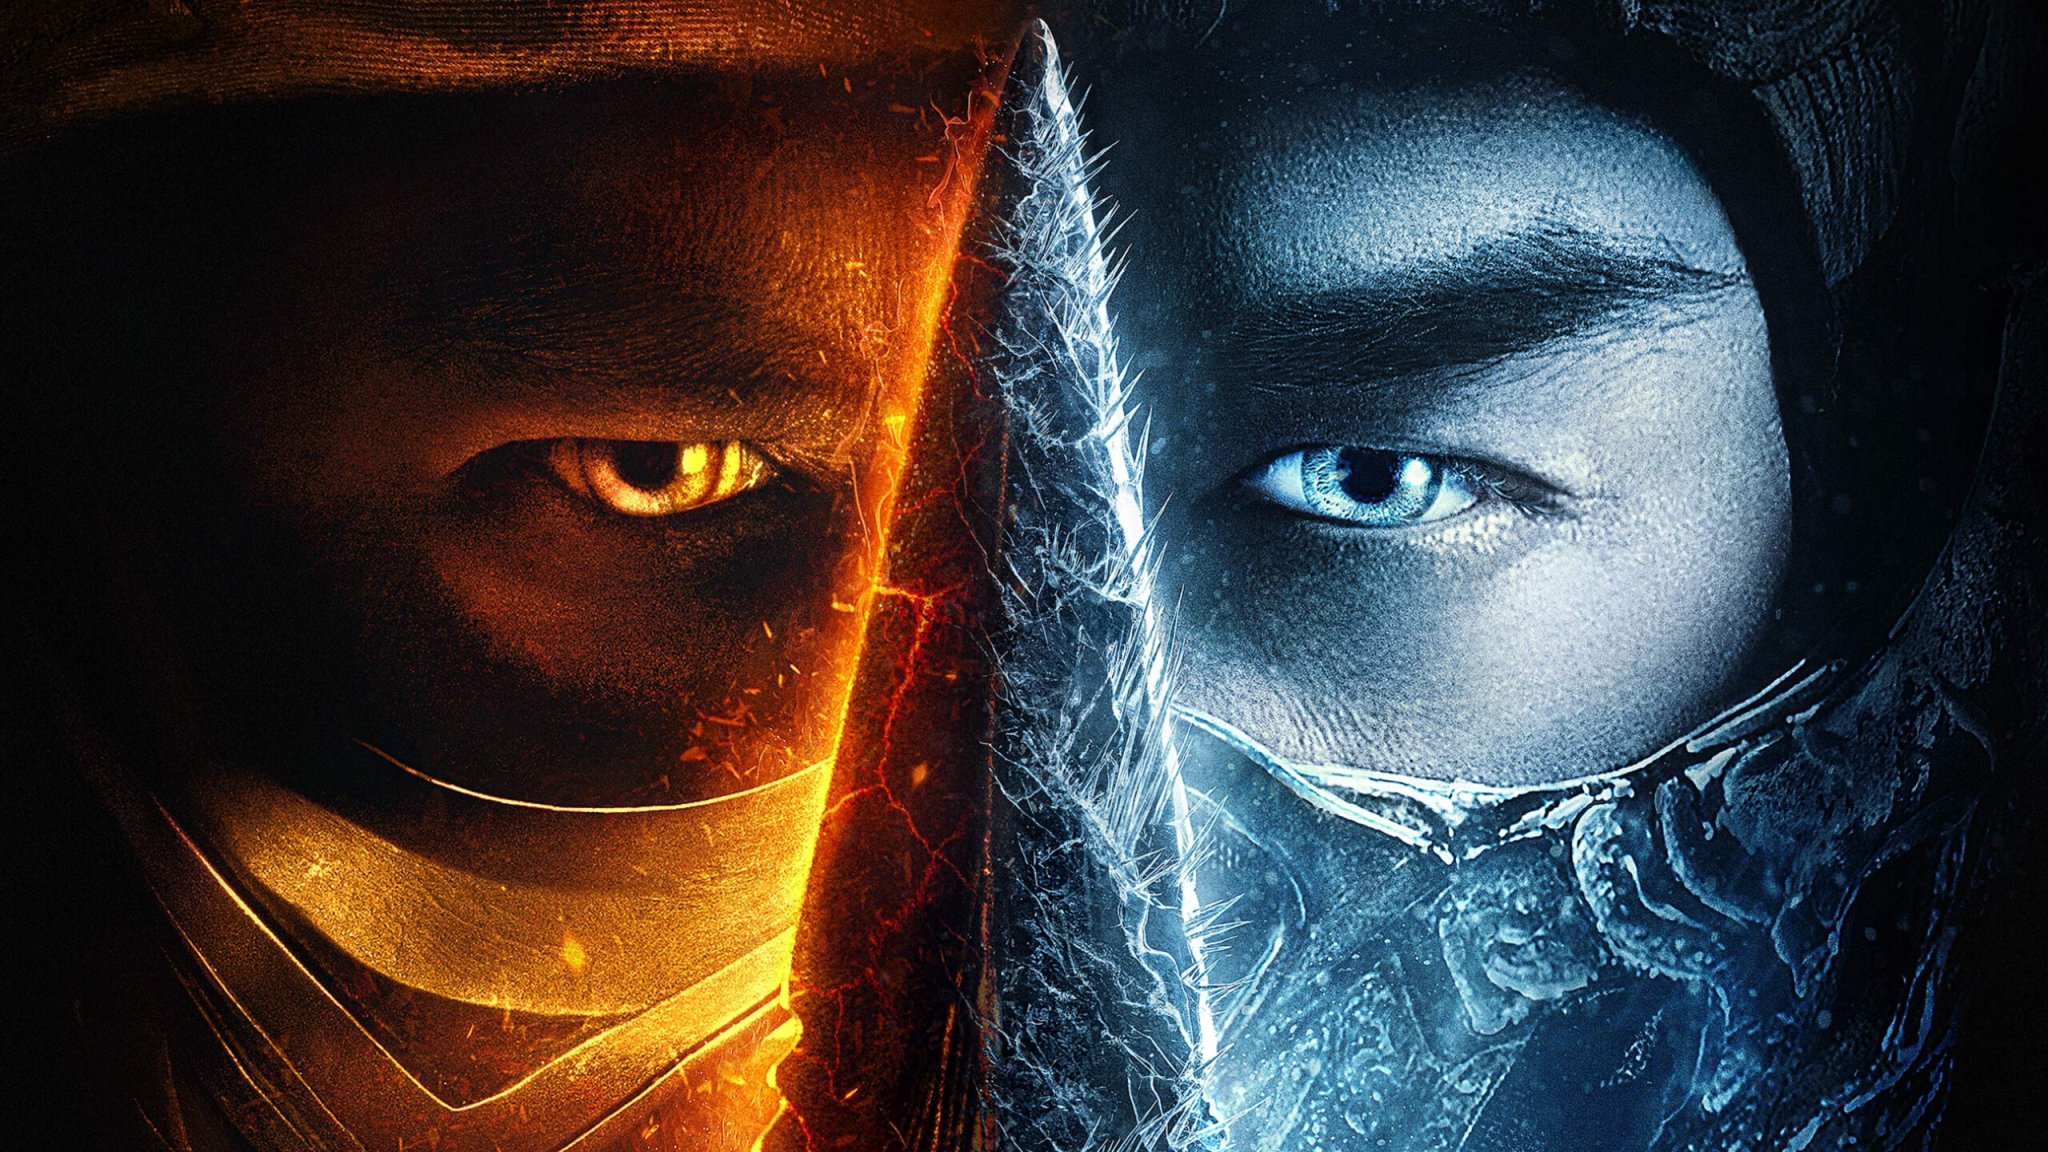 Mortal Kombat 2 Has Already Found Its Johnny Cage & Other Sequel Plans